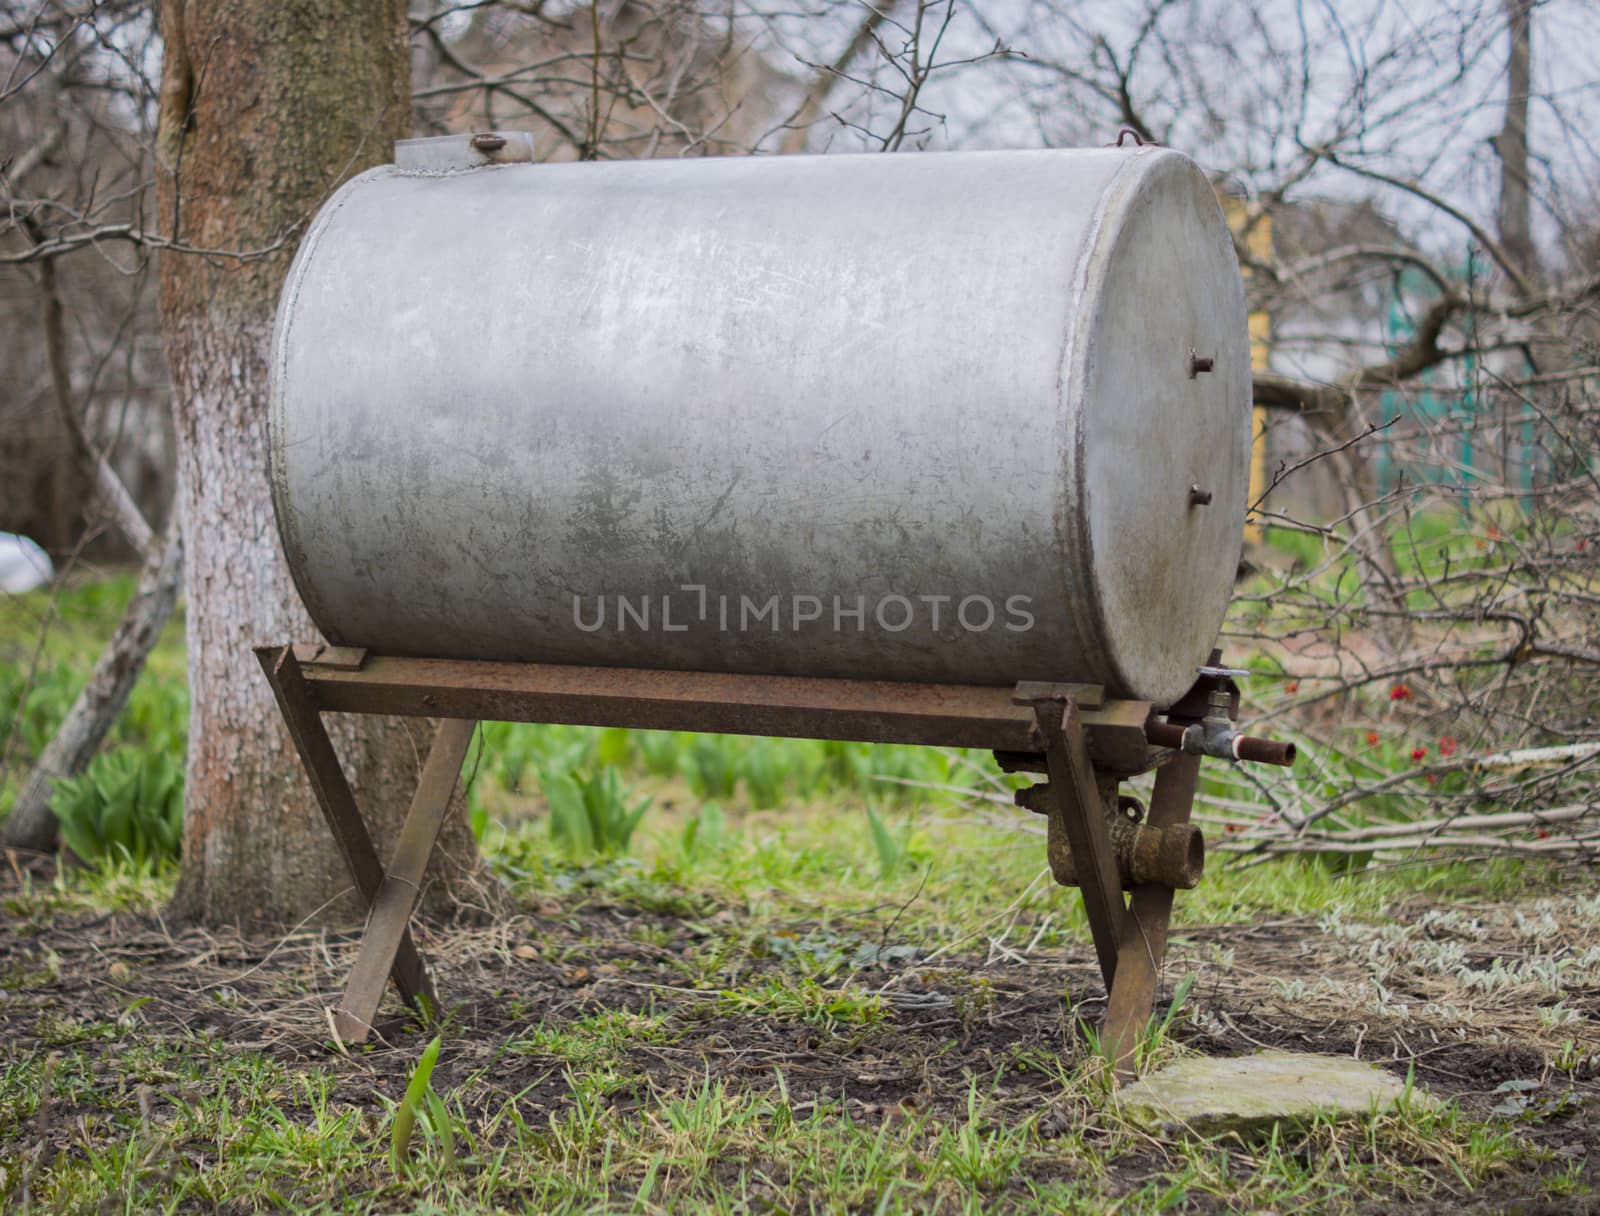 rusty tank. For your commercial and editorial use by serhii_lohvyniuk